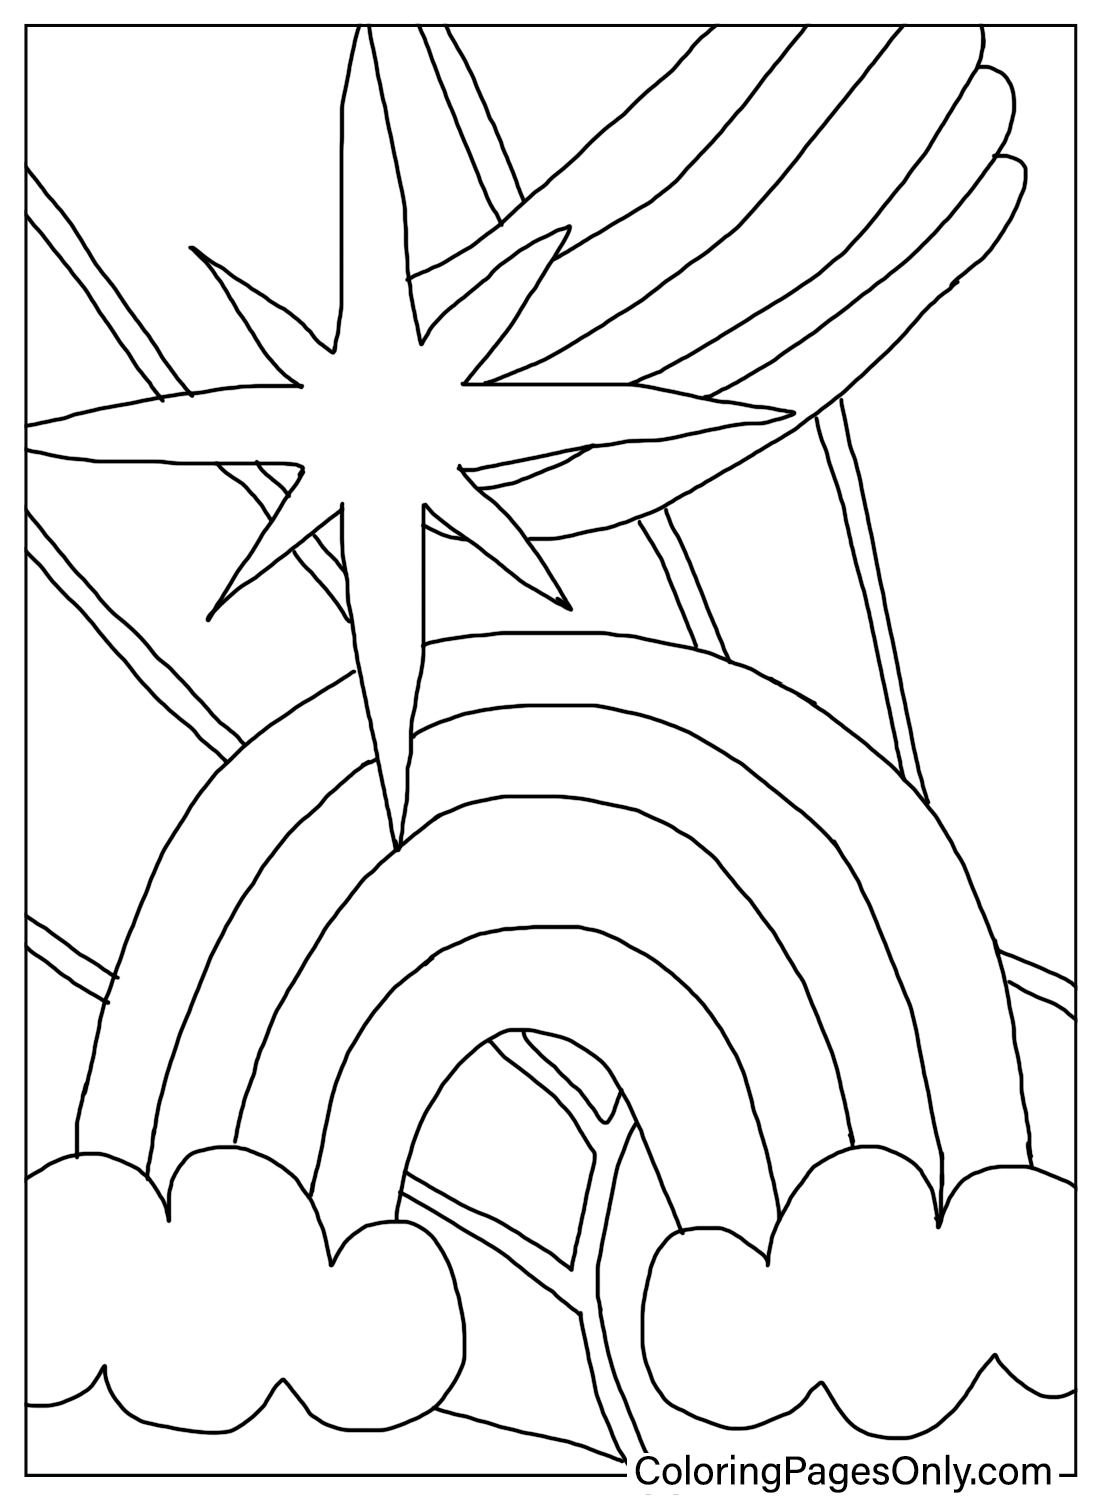 Coloring Page Hippie Rainbow and Star from Hippie